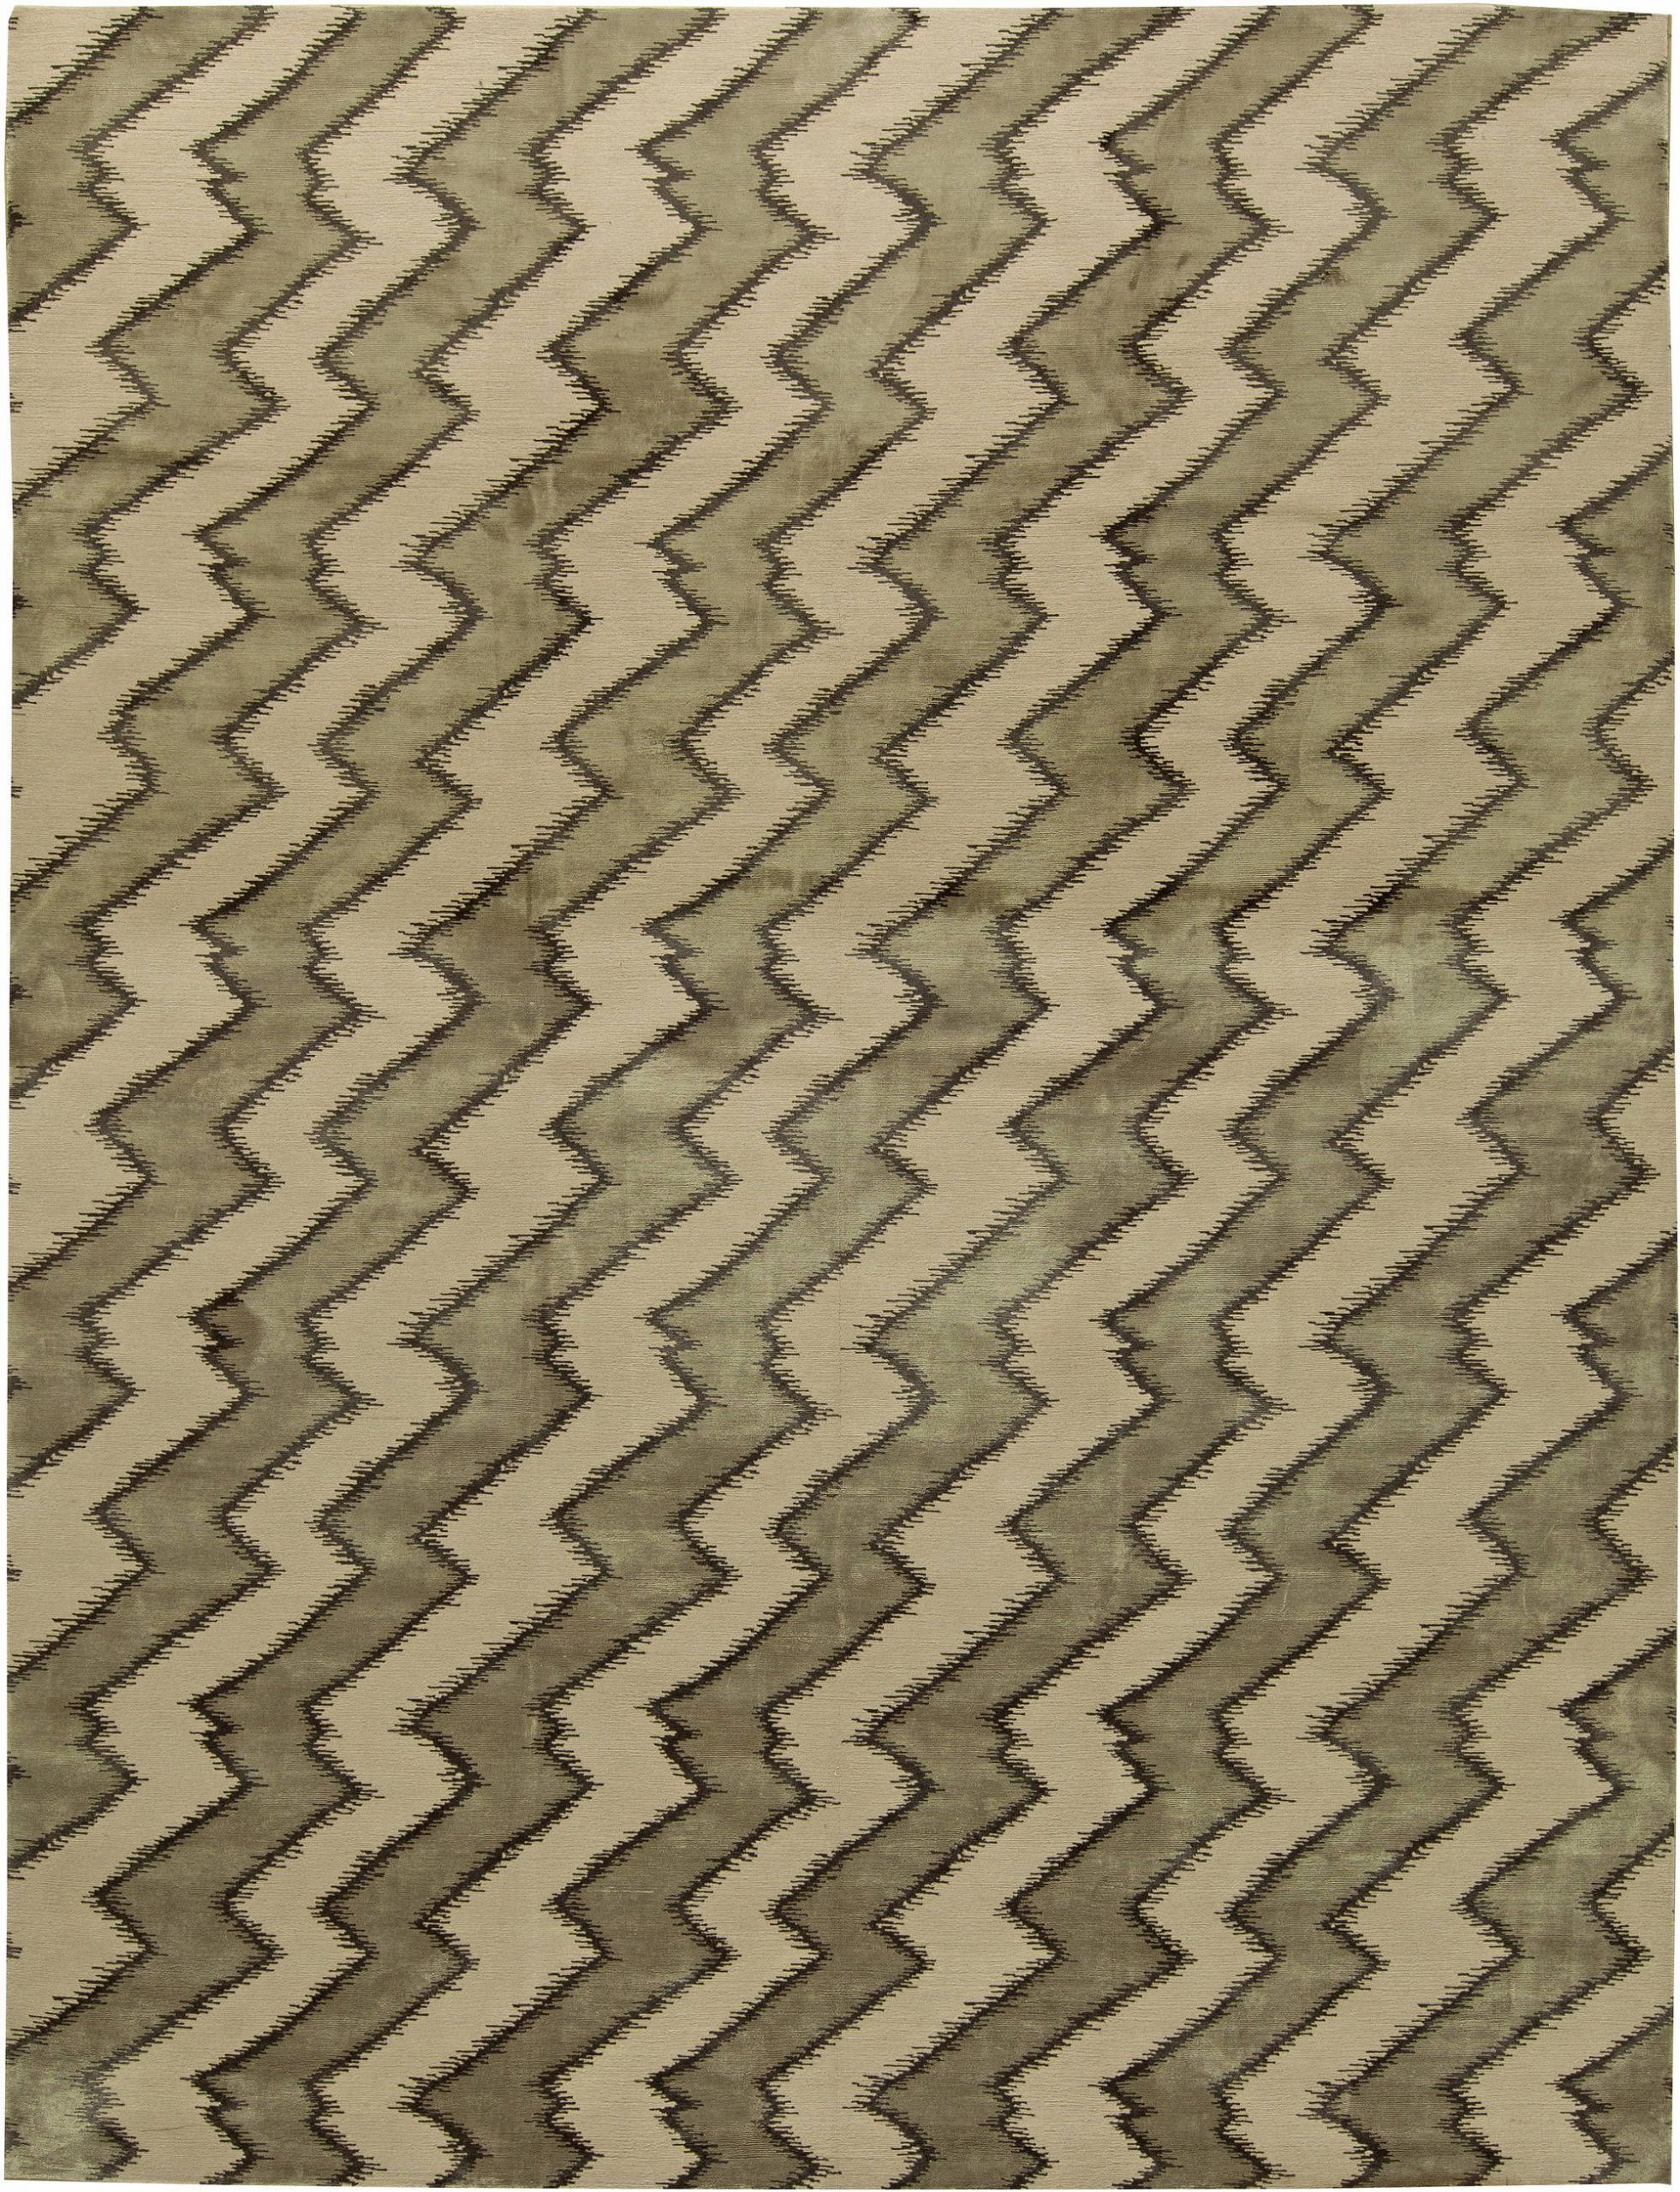 Contemporary Rug N11319 by DLB